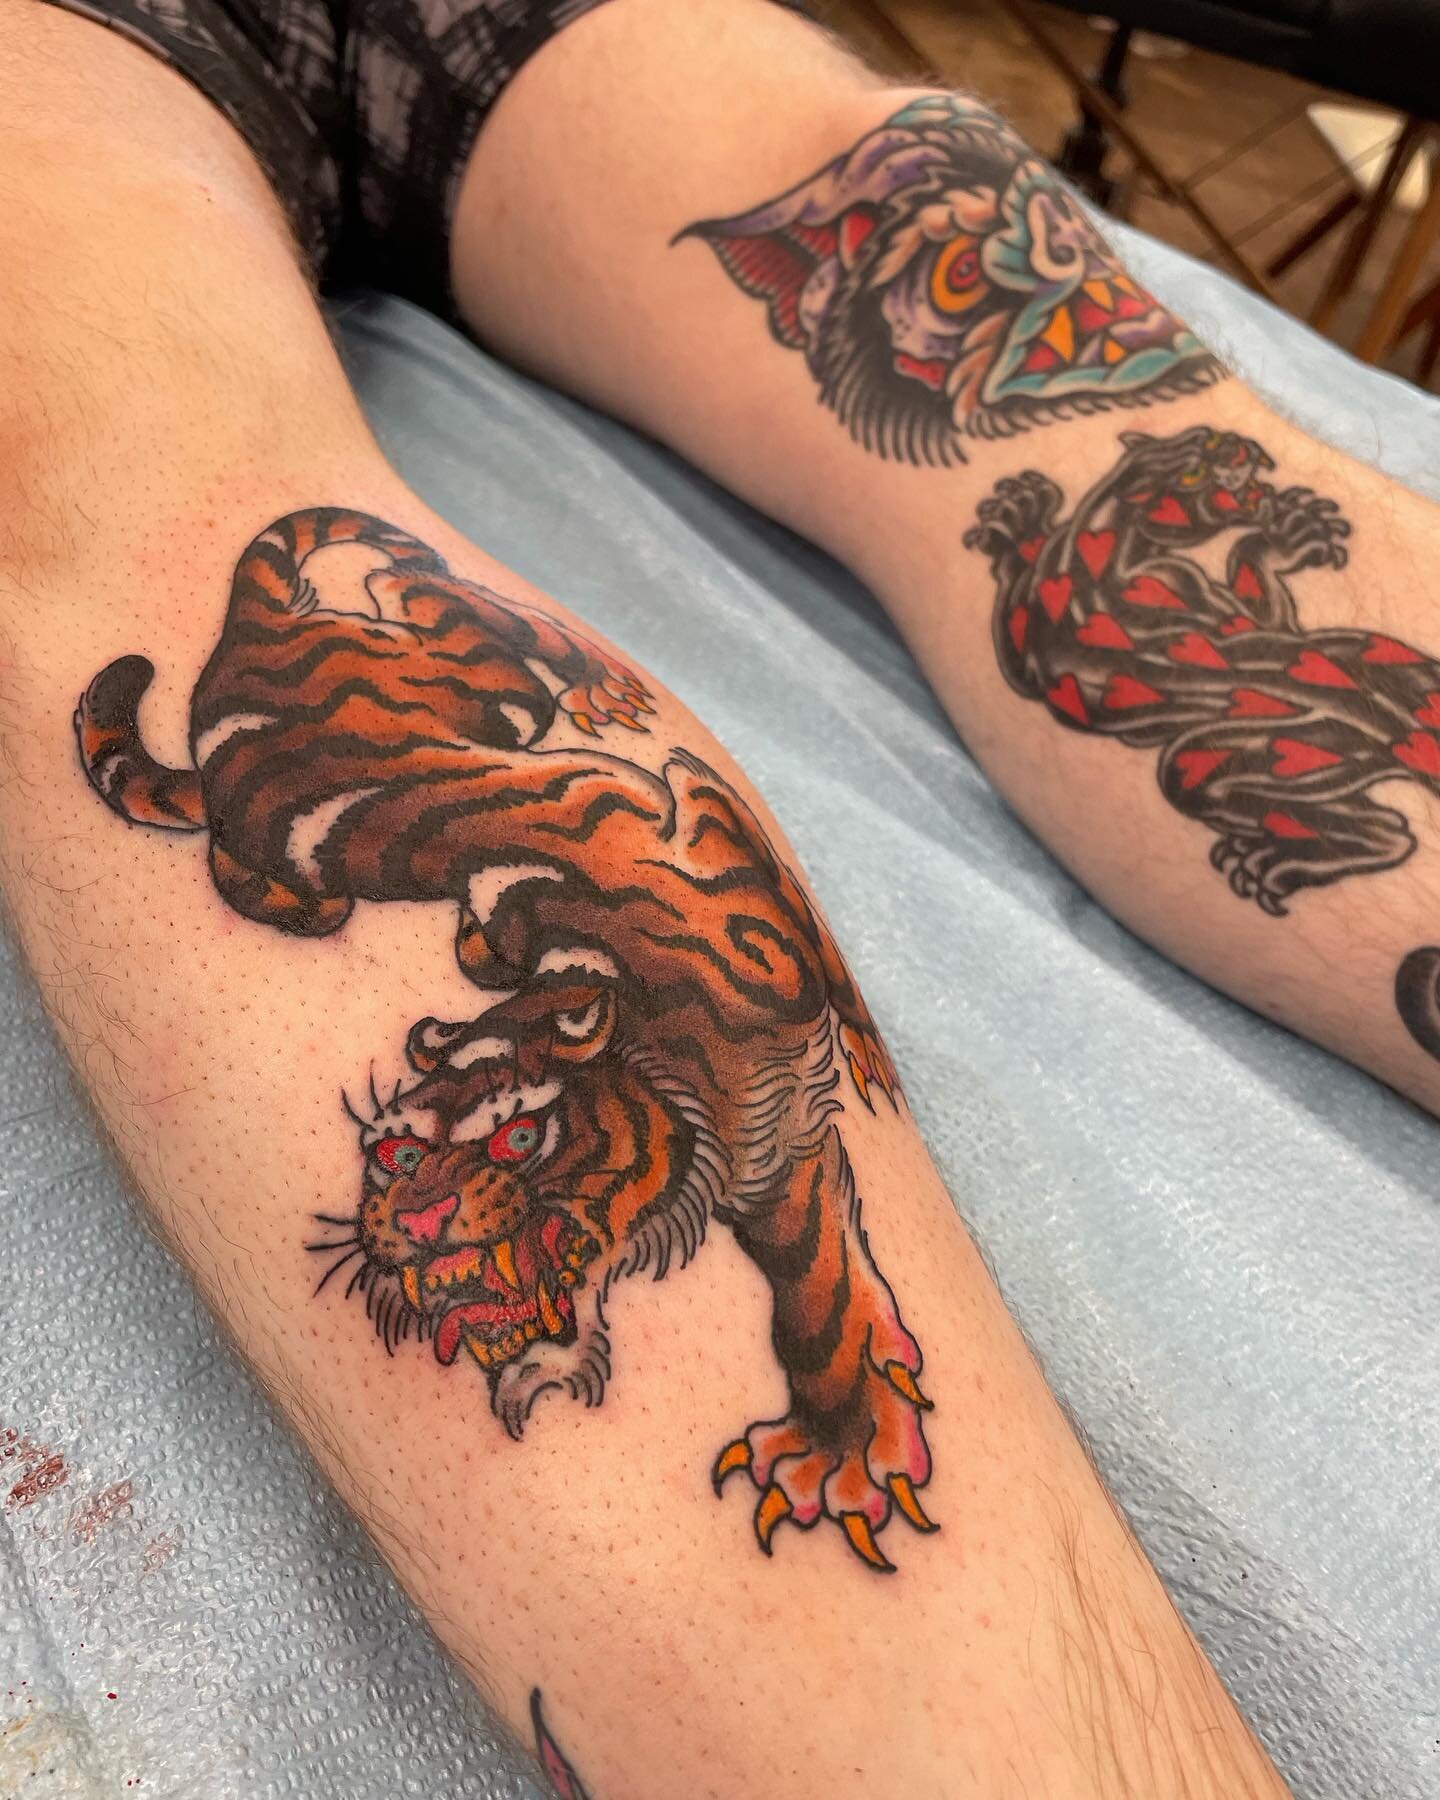 Big ole&rsquo; kitties by the Jakemeister @jacobgreentattoo 

He&rsquo;s currently booking into August/September+

In Love Tattoo 1130 Burke St. Winston-Salem #nctattooer #nctattooers #vegan #vegantattooer #vegantattooers #nctattoo #dtwsnc #wsnclocal